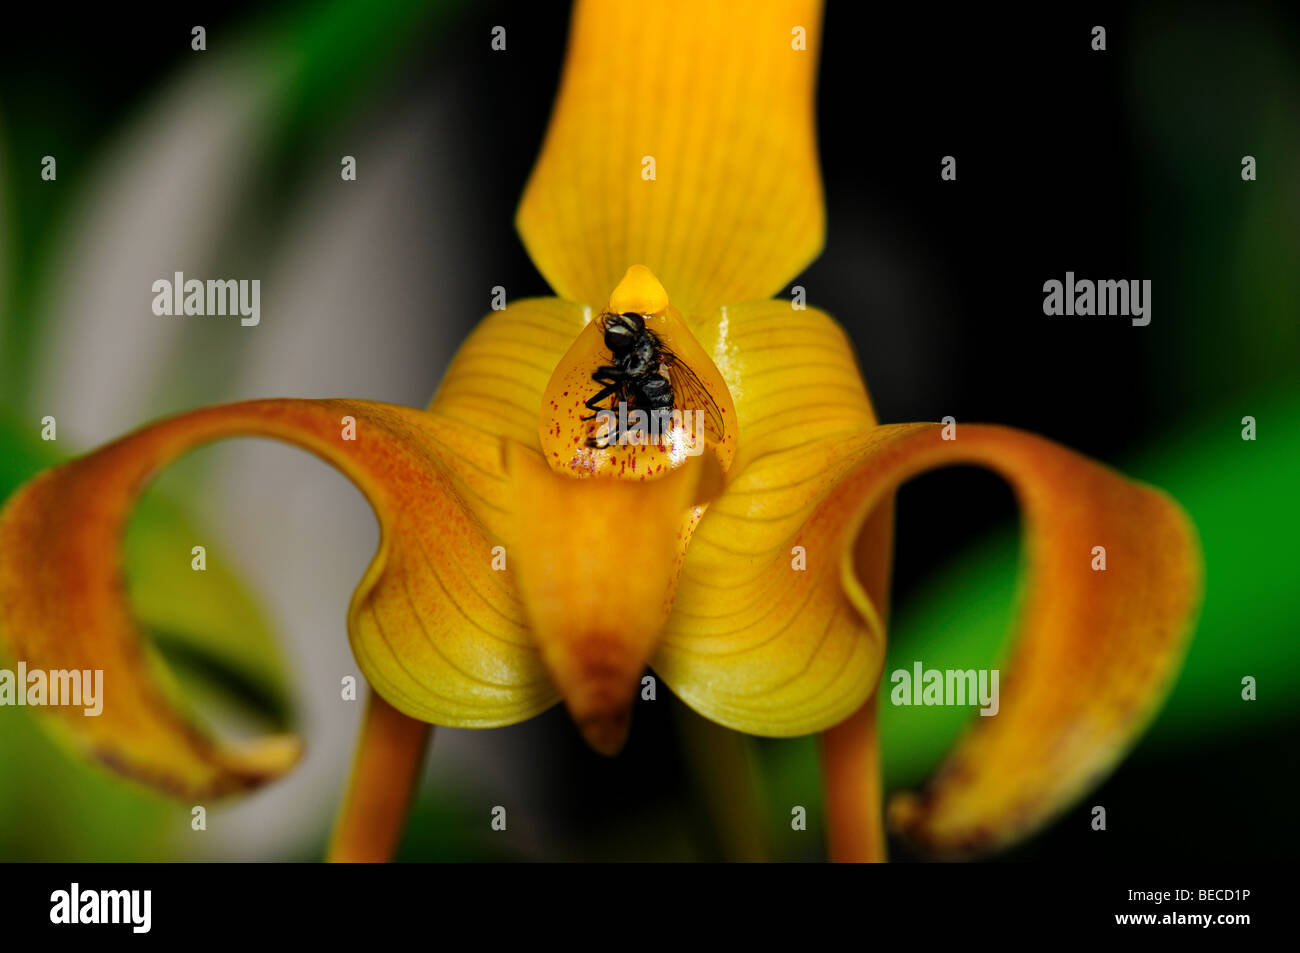 A fly caught by the sticky labellum of an orchid Bulbophyllum lobbii flower. Stock Photo